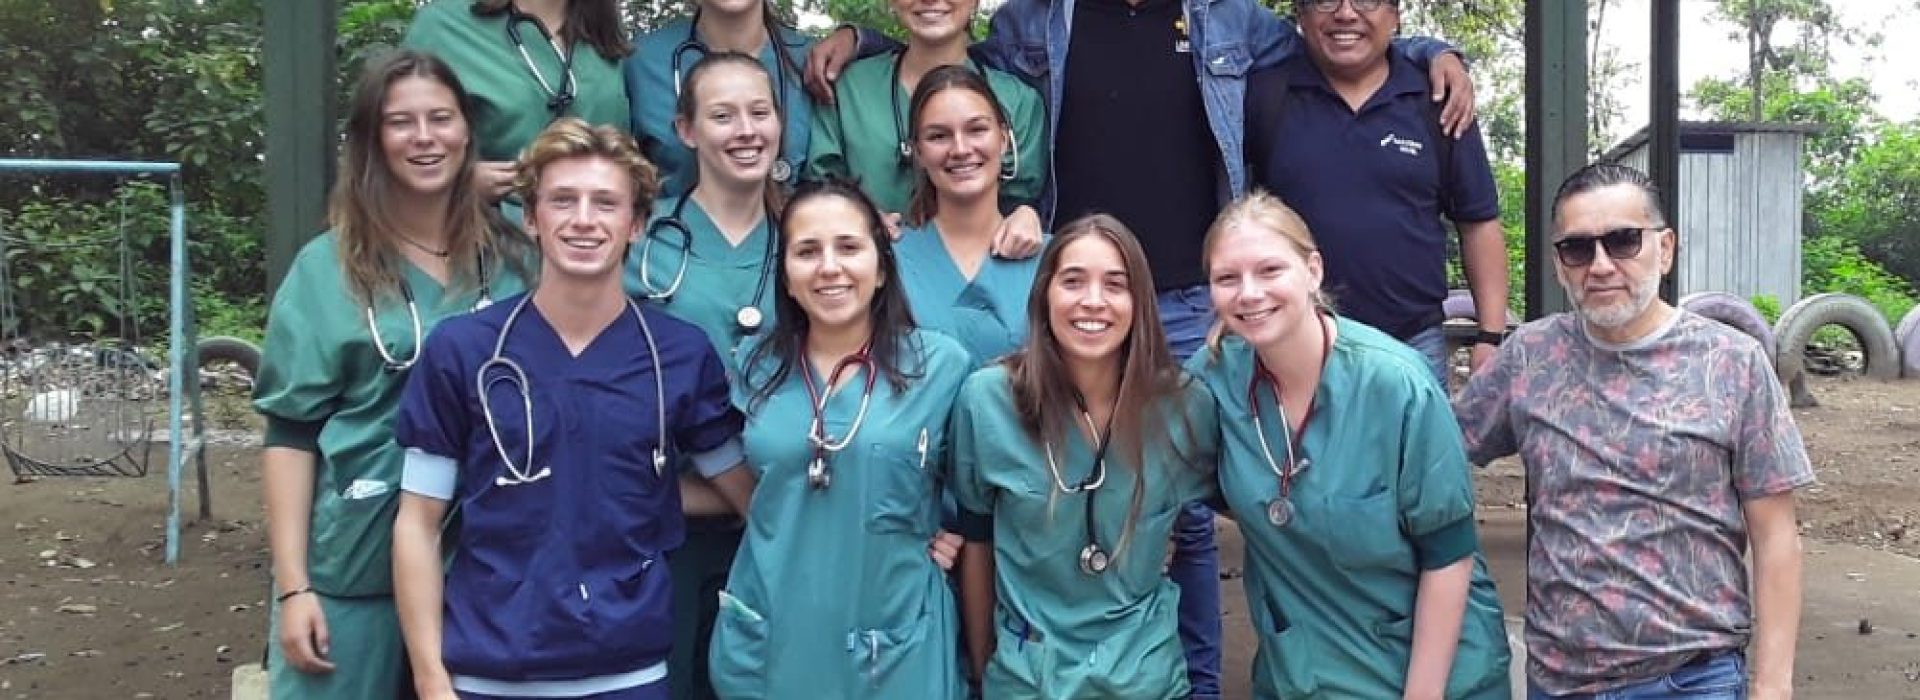 medical participants in scrubs